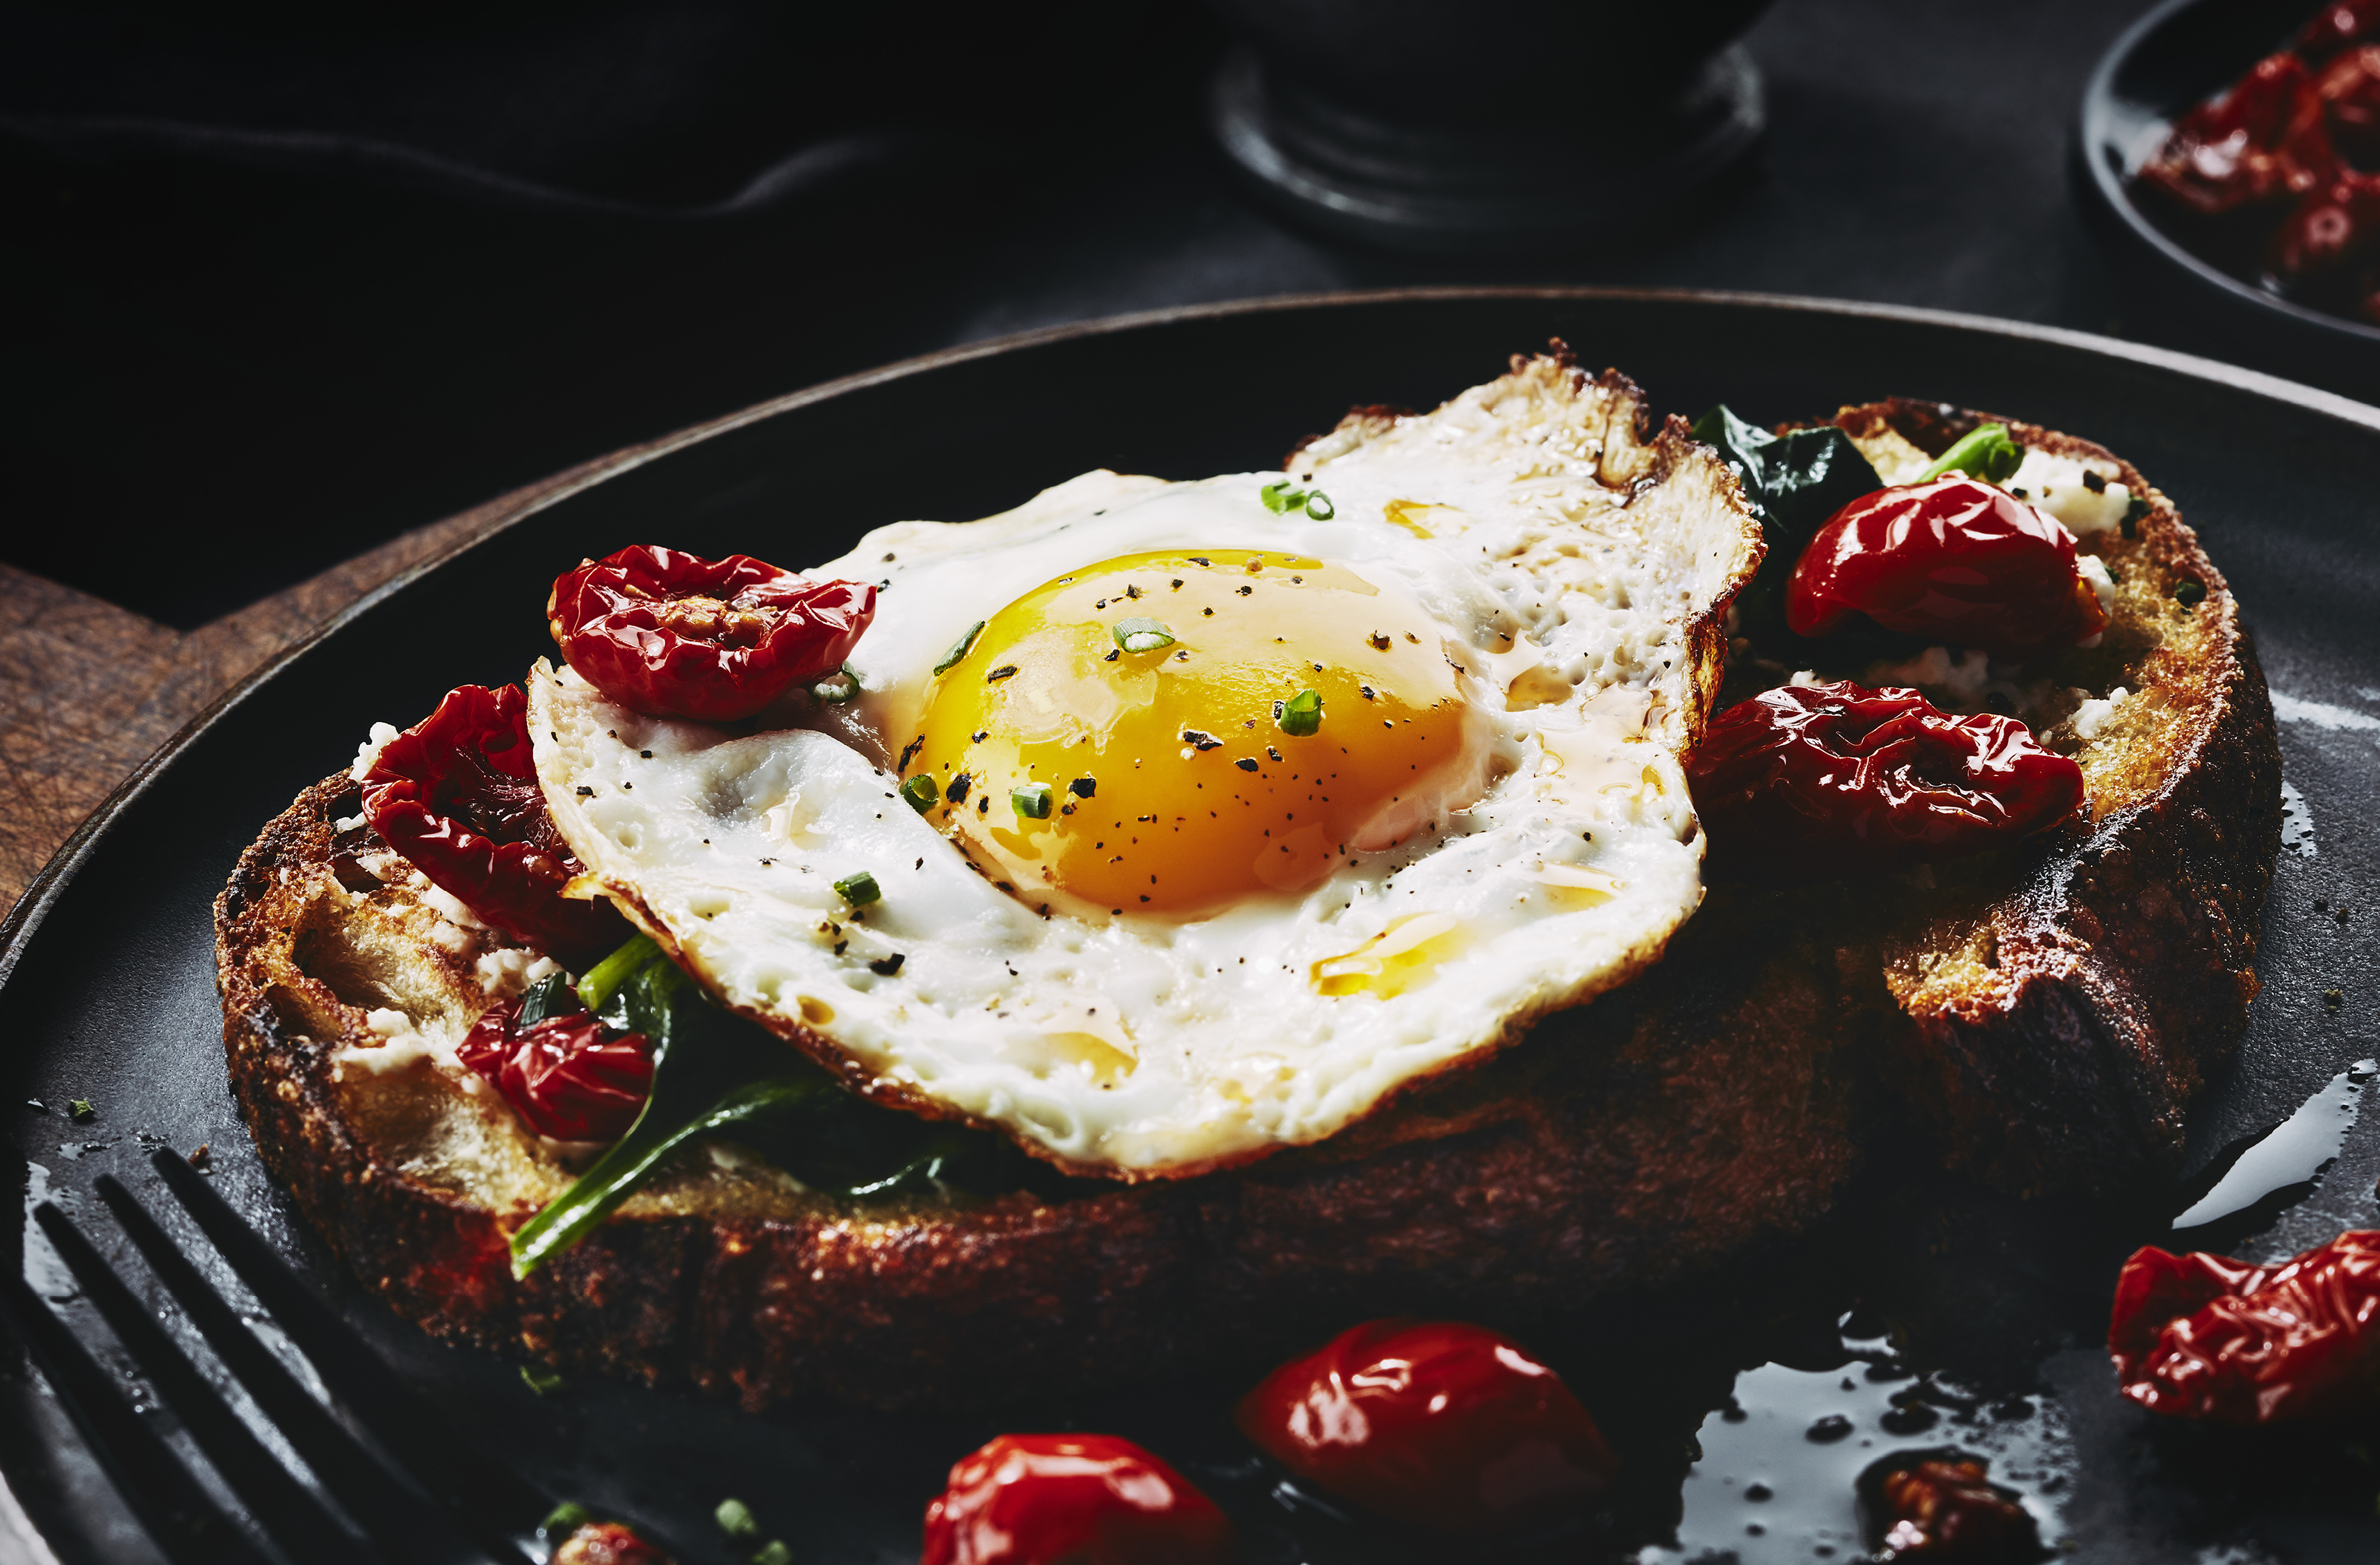 An open-faced egg sandwich with PC Black Label Roasted Cherry Tomatoes on a slice of toast.